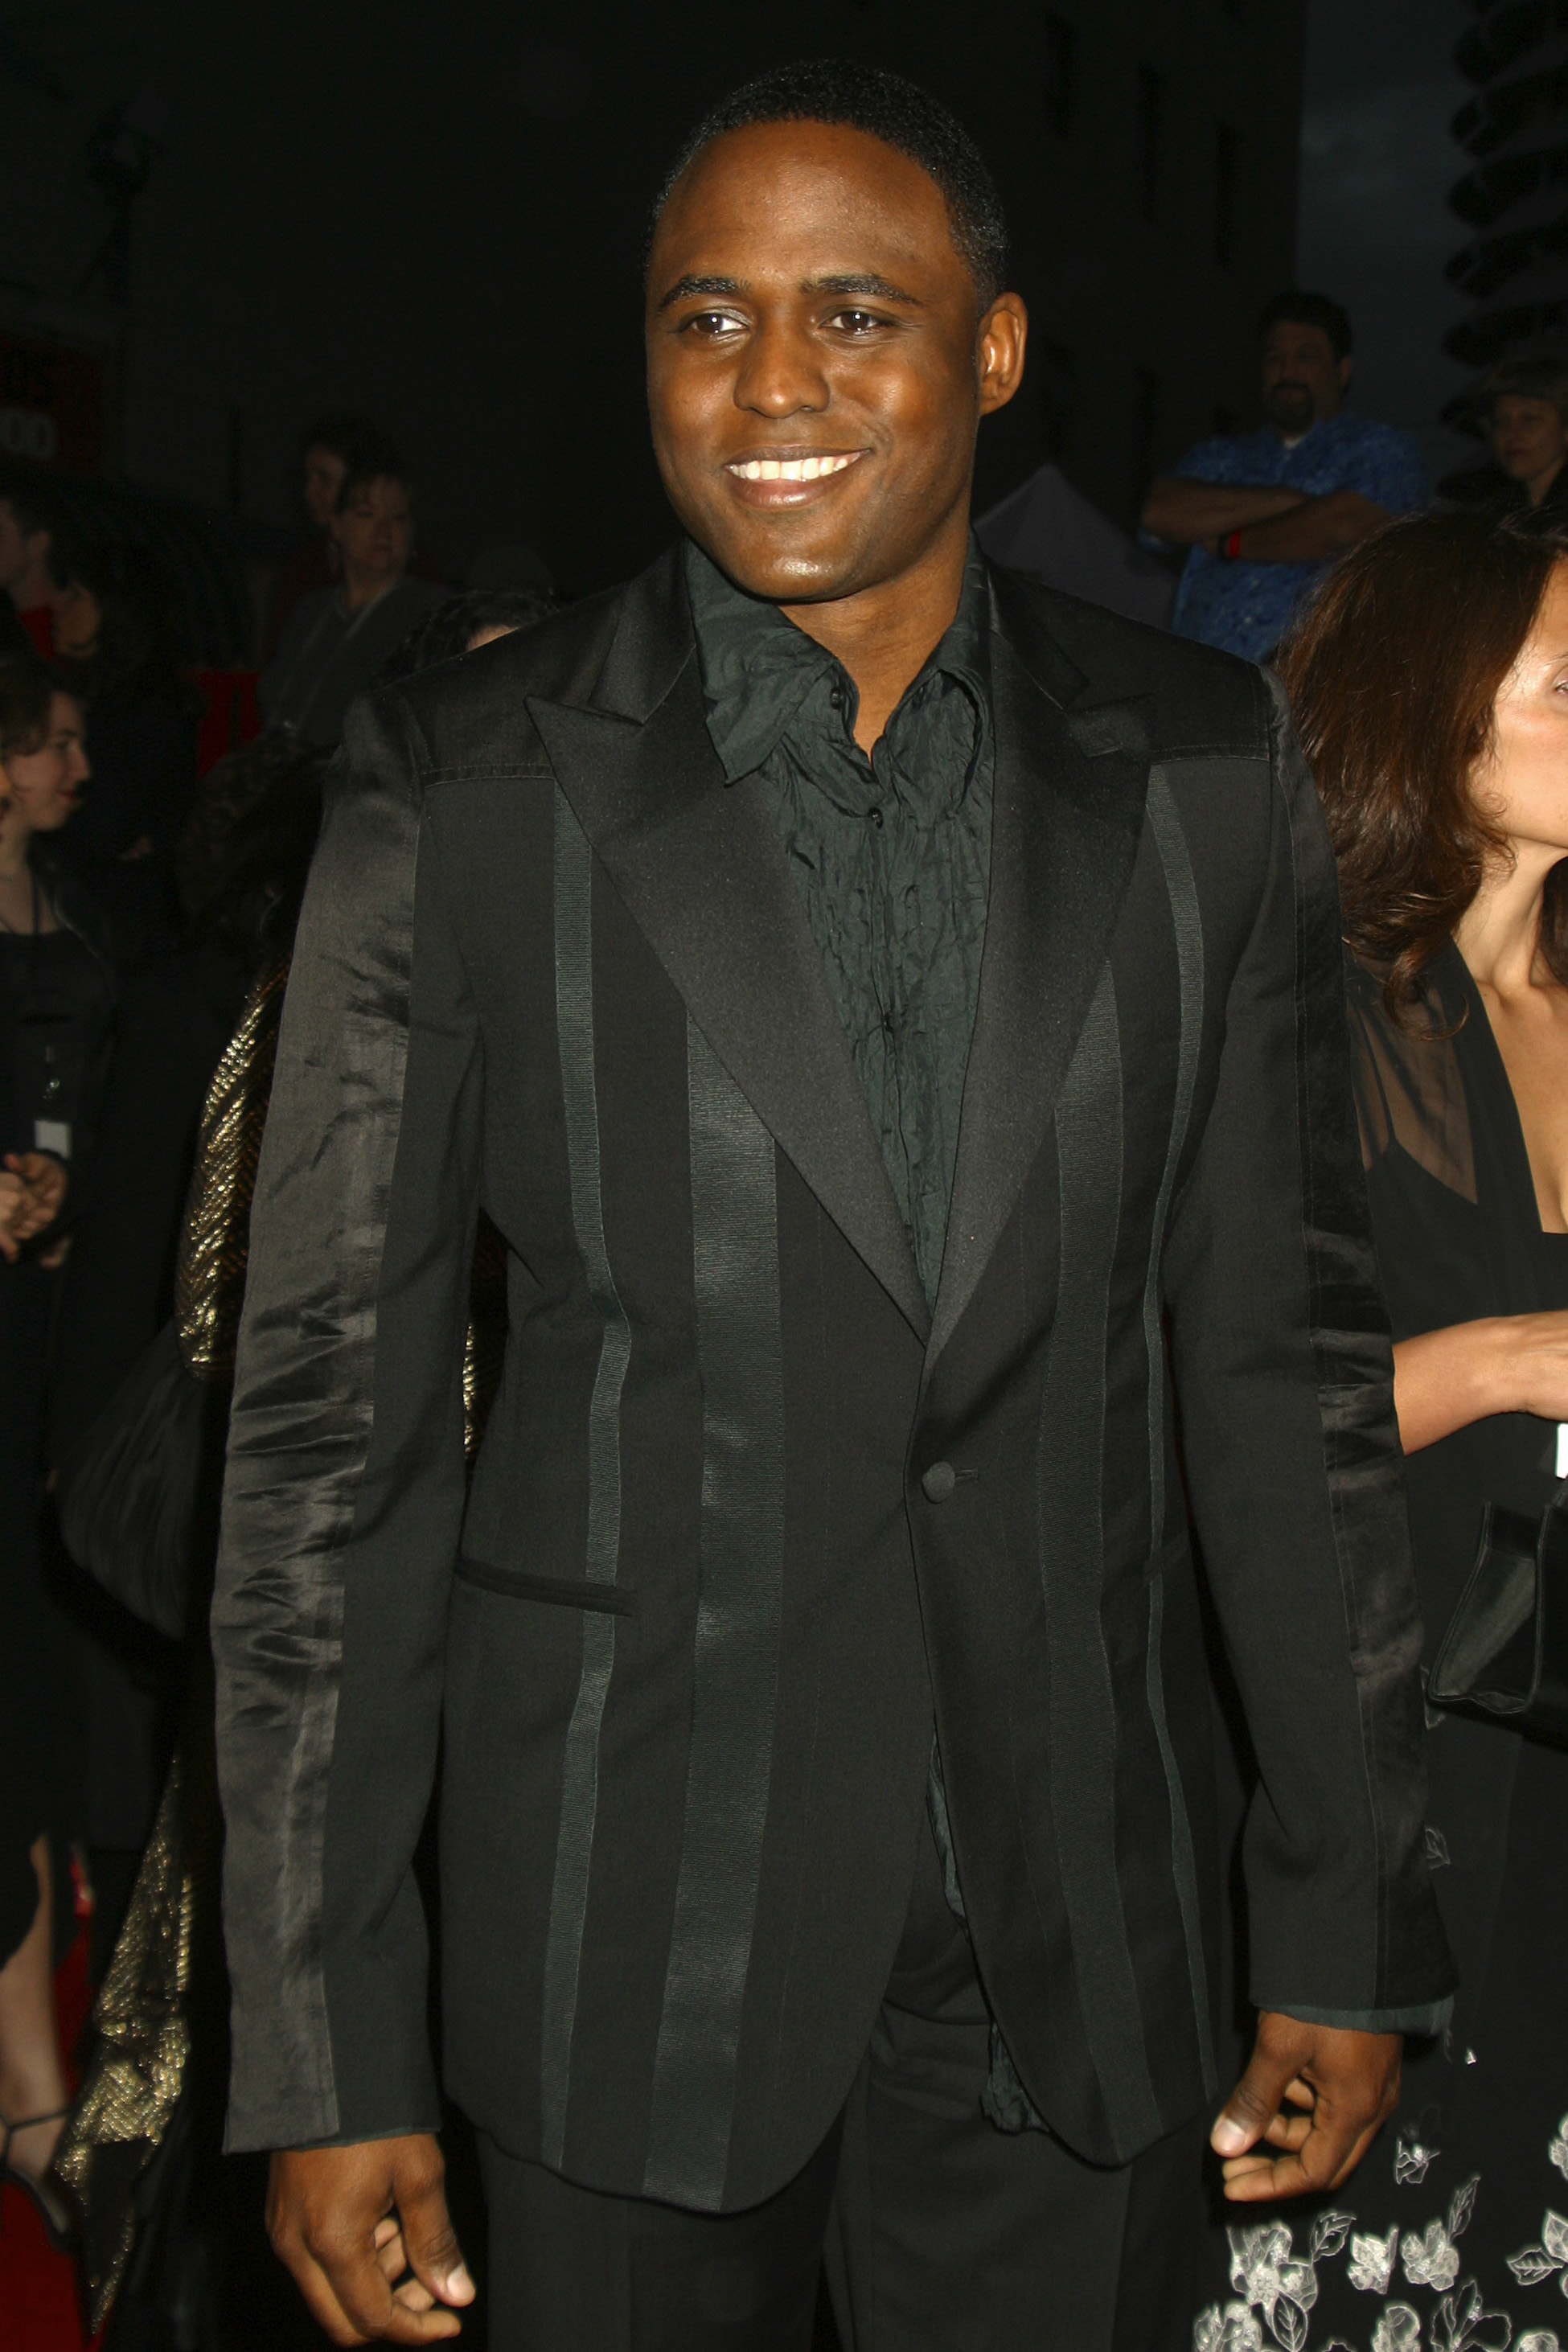 Wayne Brady at the ABC 50th Anniversary Party in Hollywood, California, on March 16, 2003 | Source: Getty Images